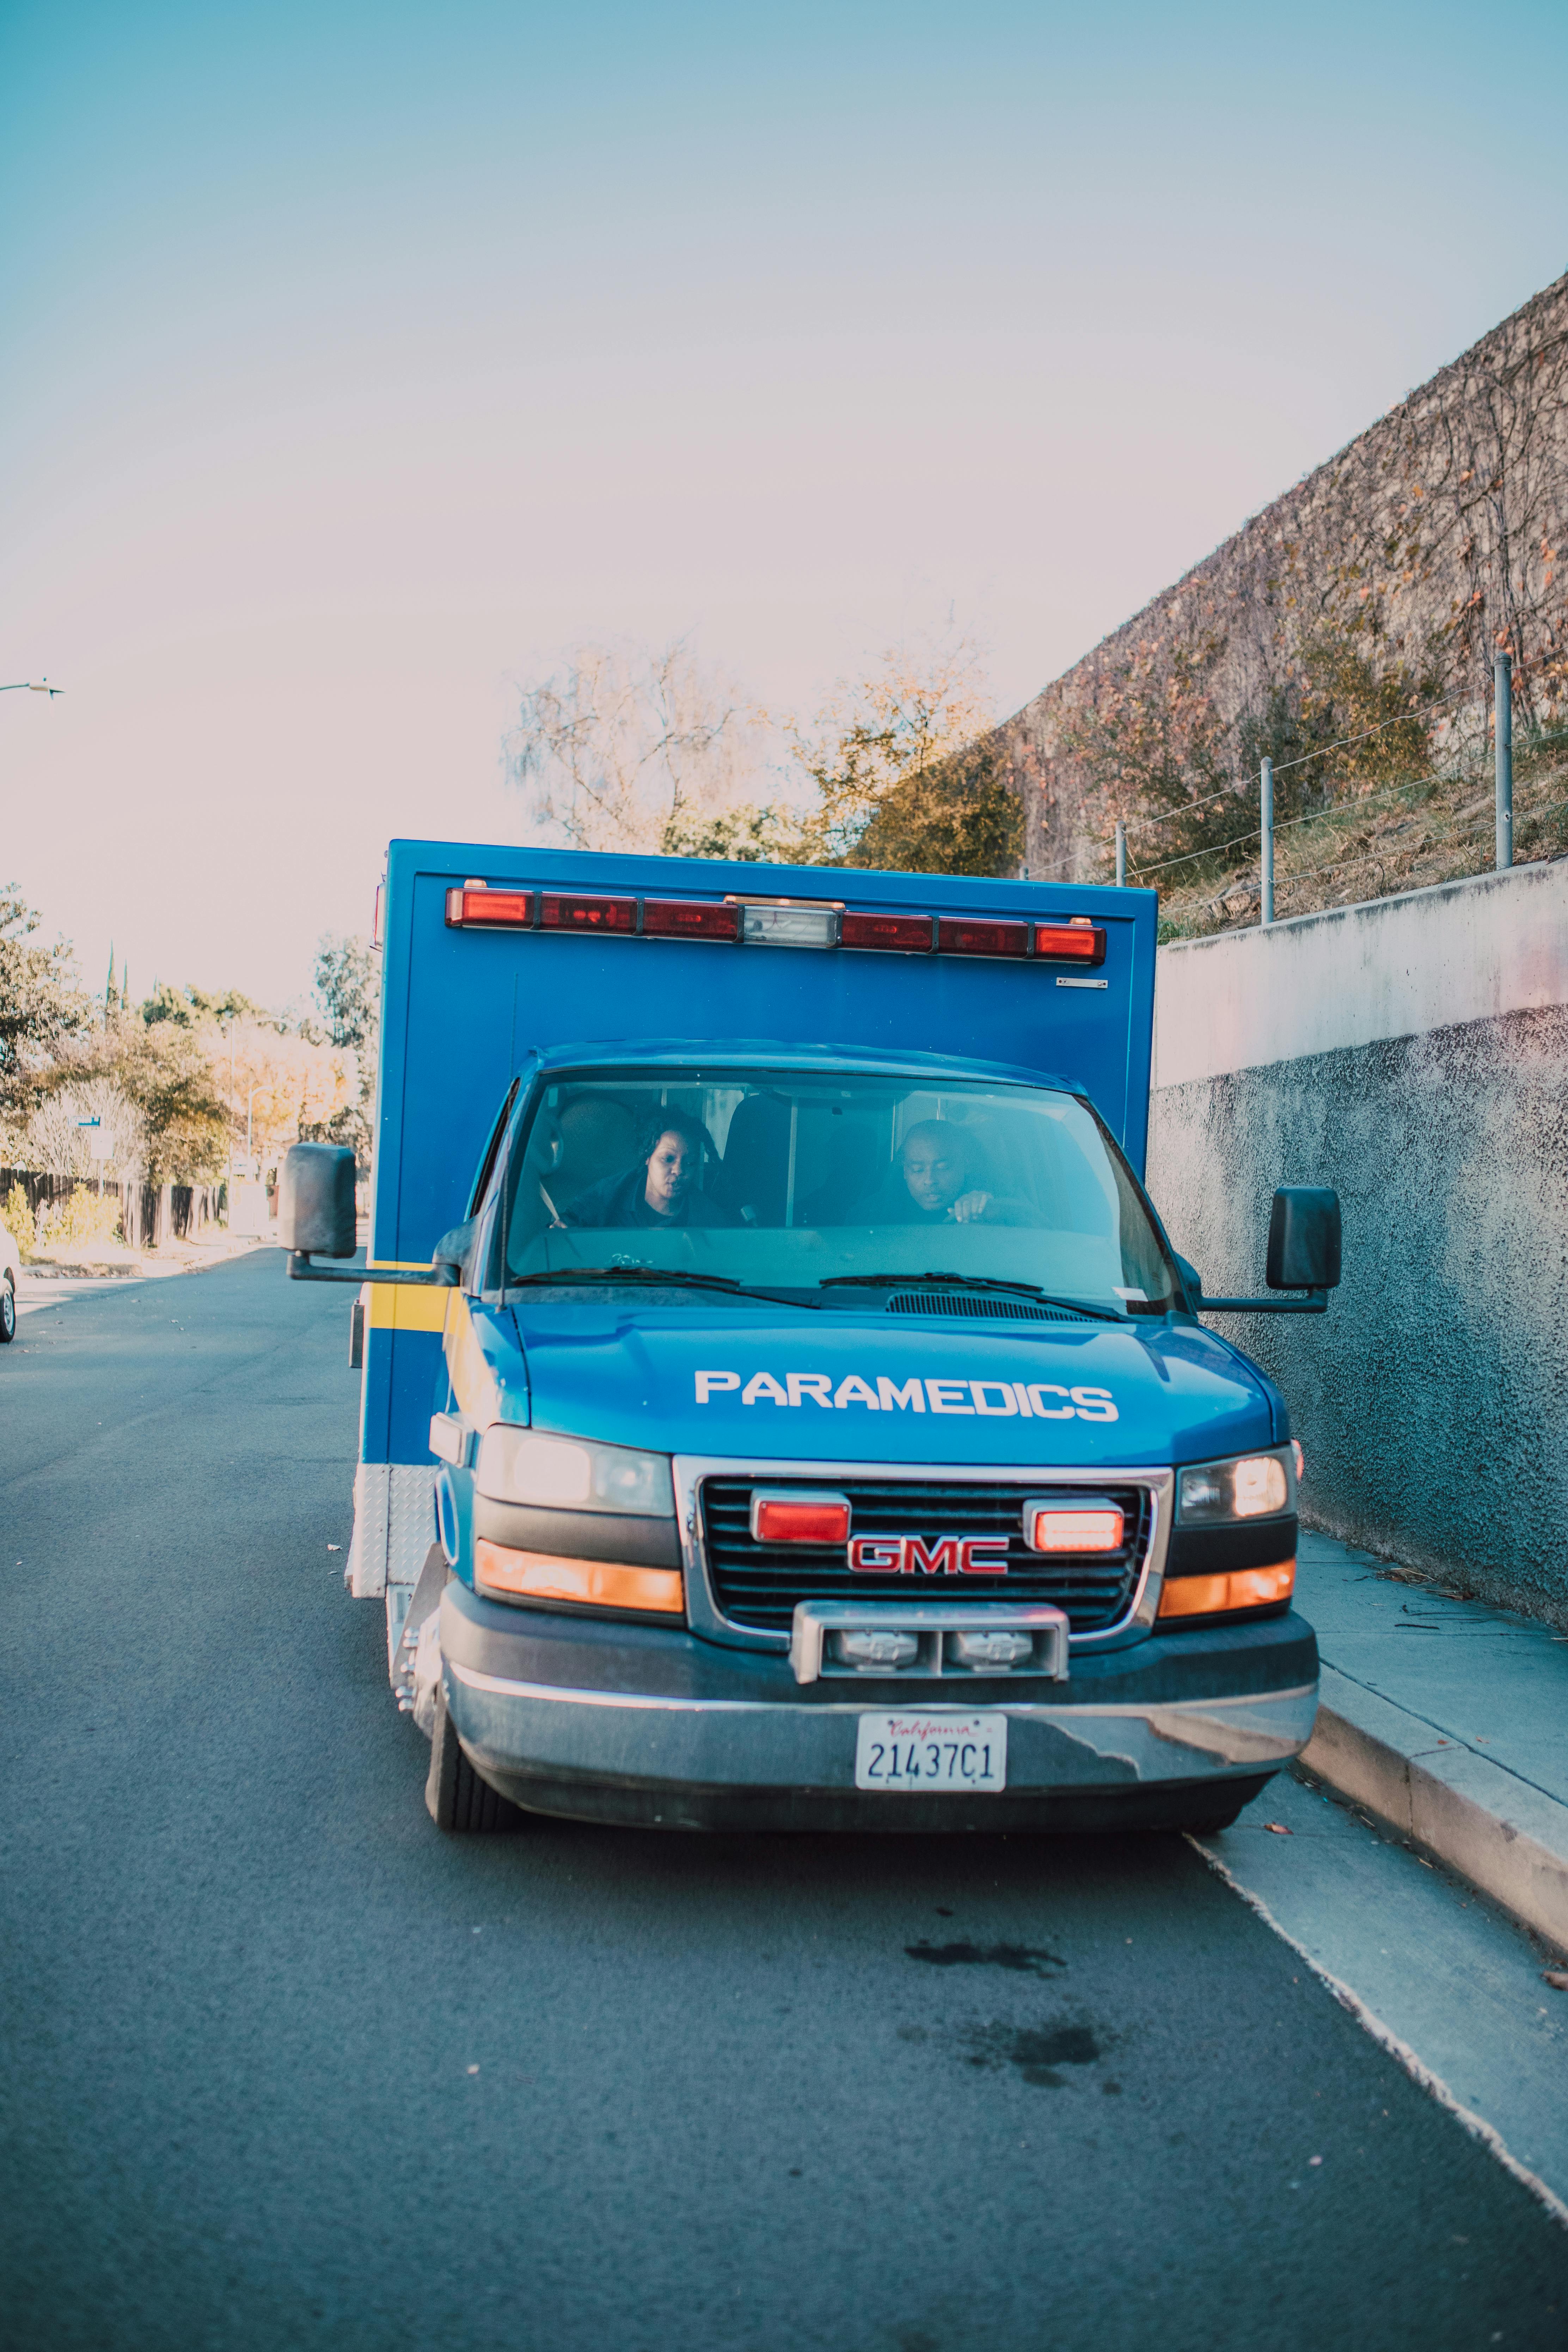 A blue ambulance parked on the side of the road | Source: Pexels